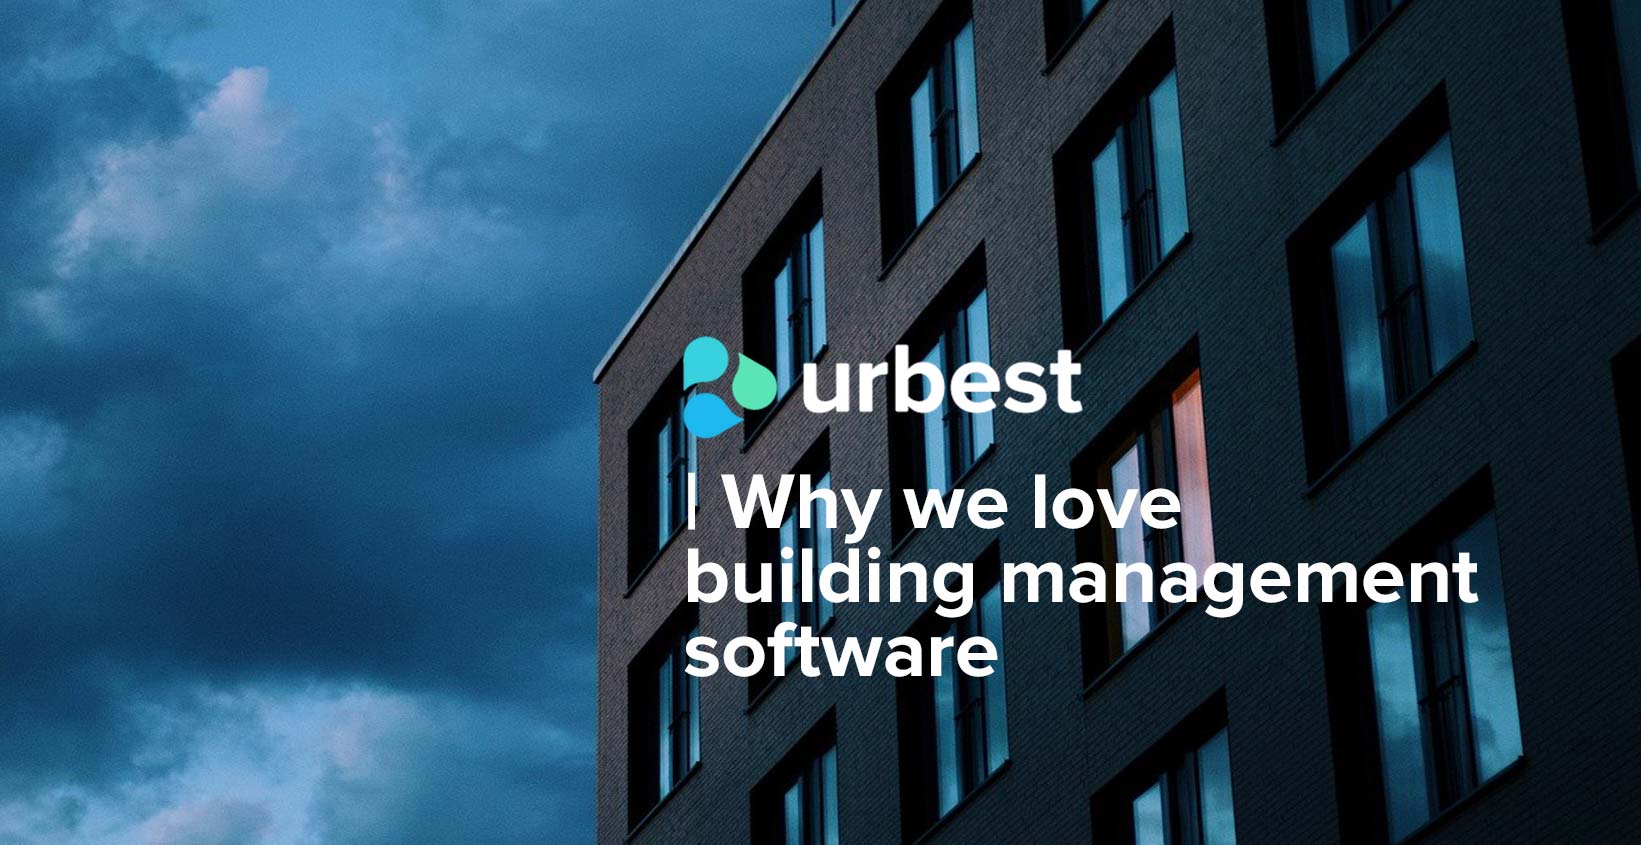 Why we love building management software